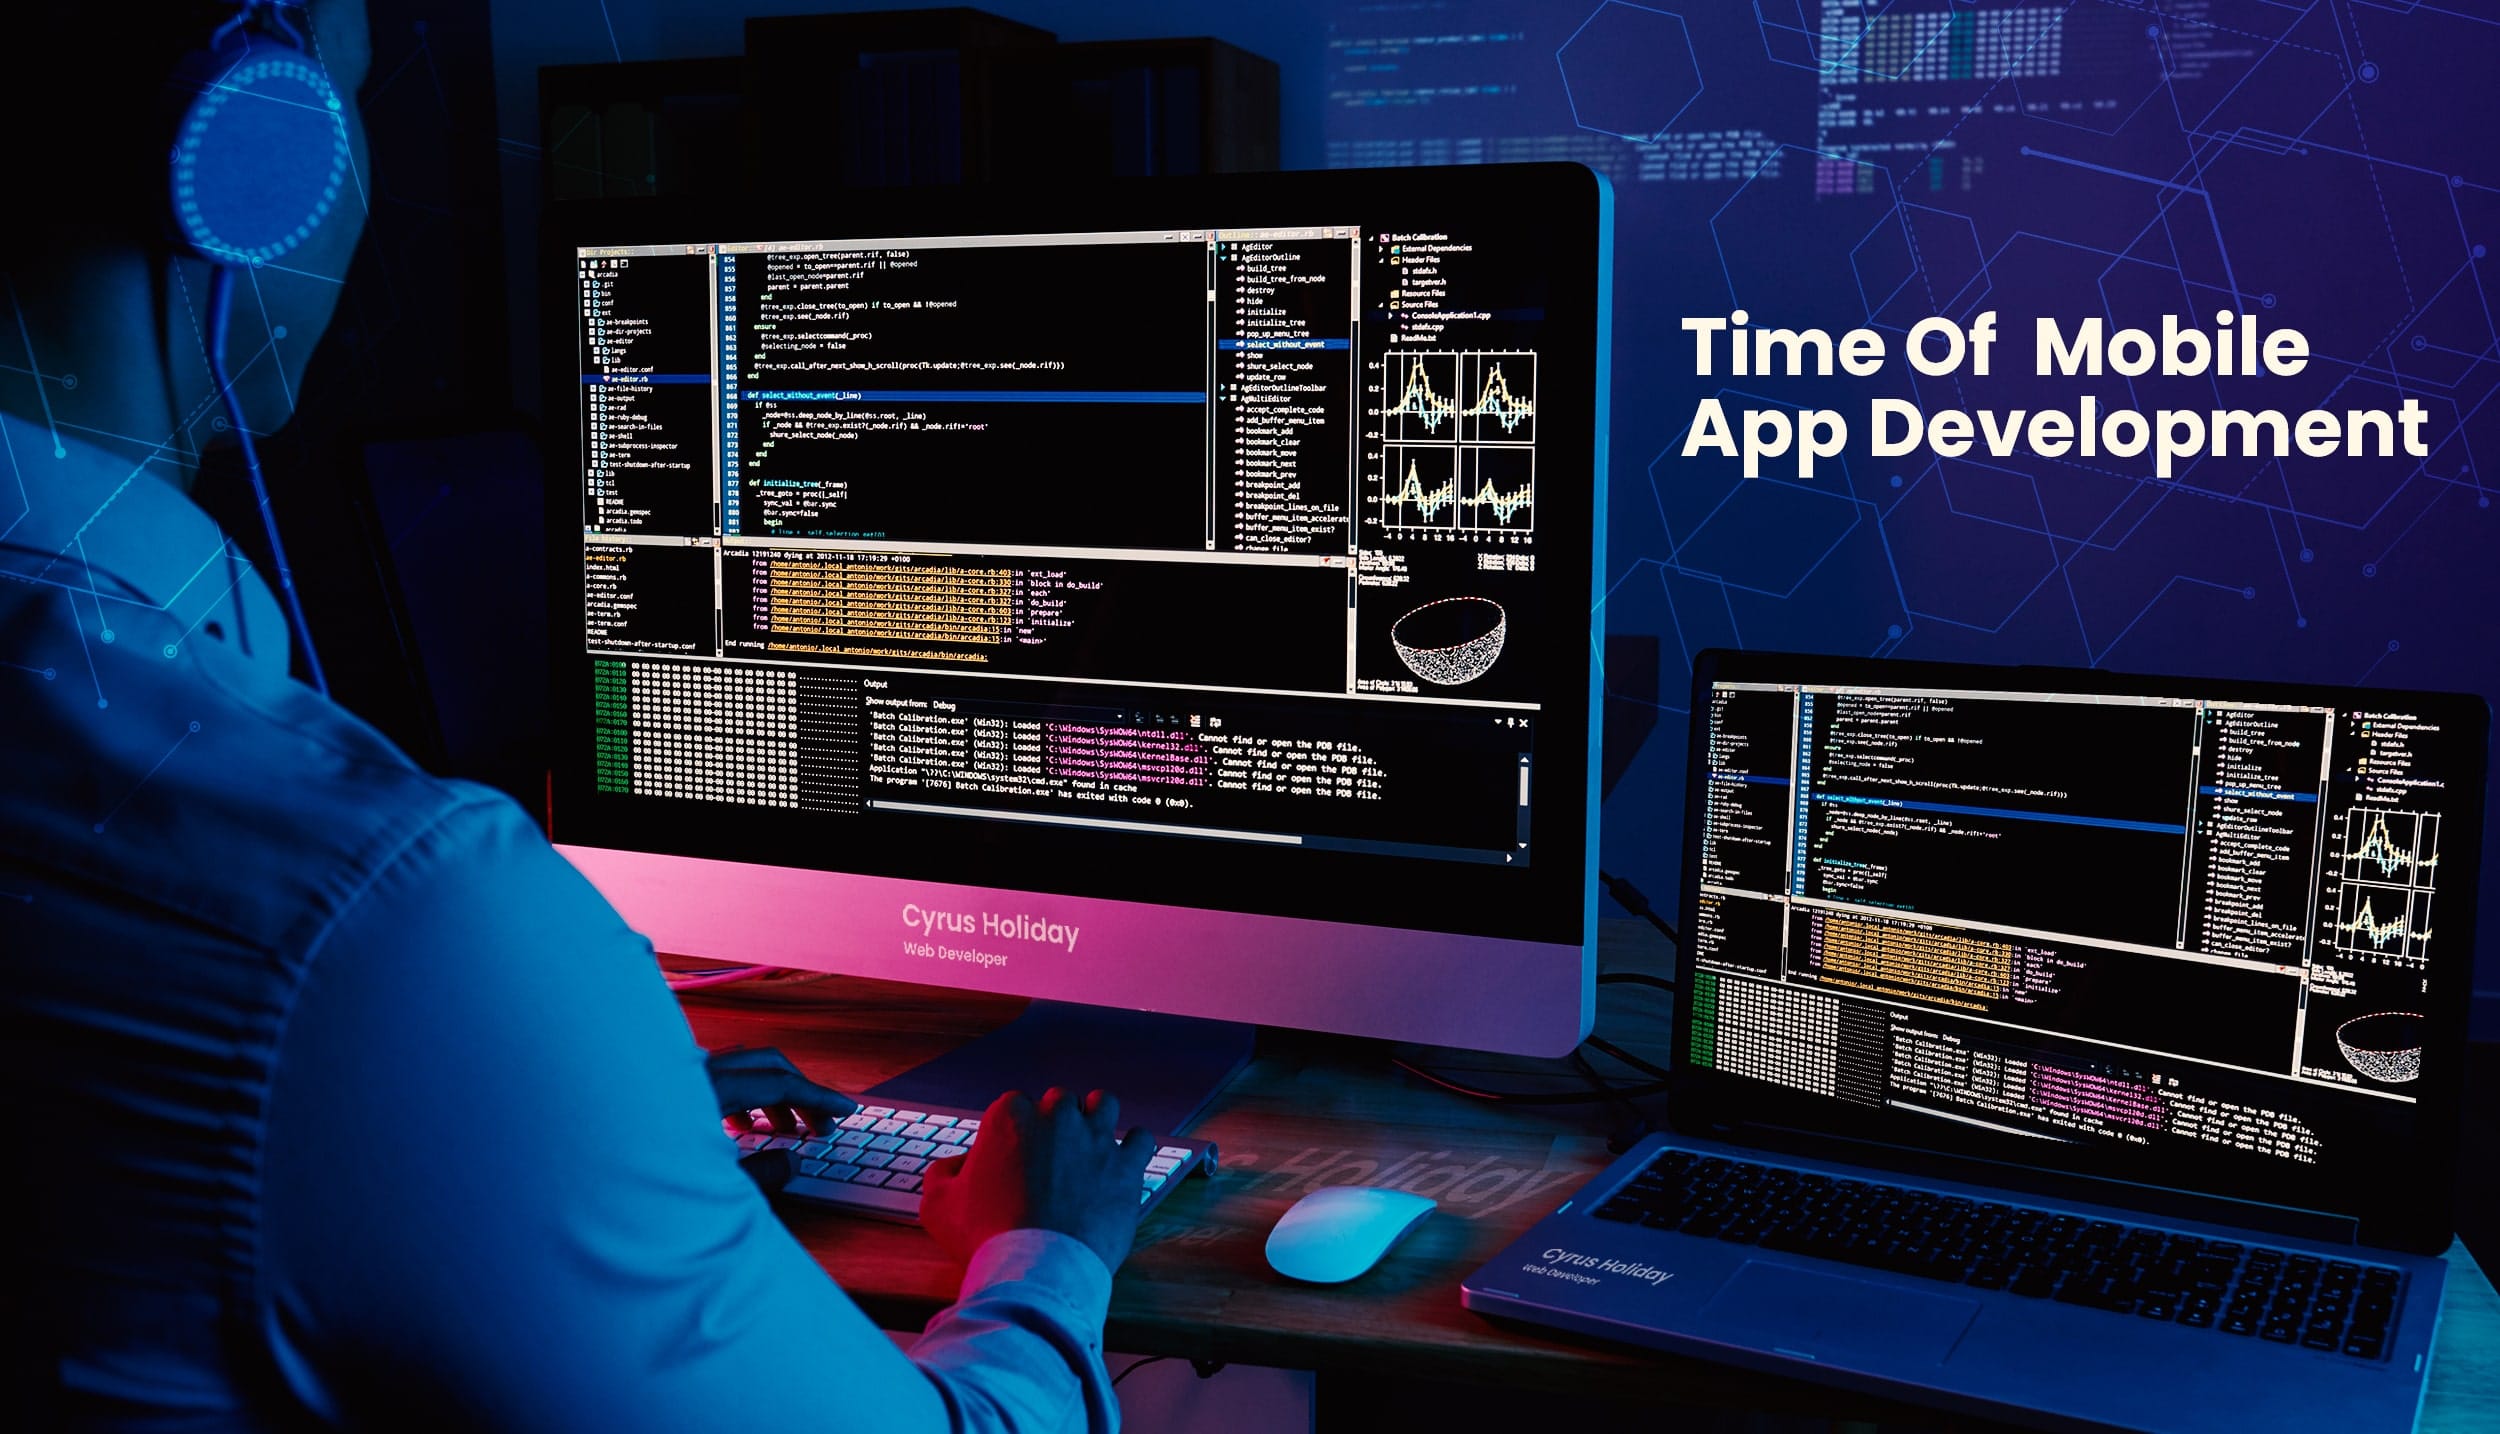 Consider This Top Hack At The Time Of Mobile App Development